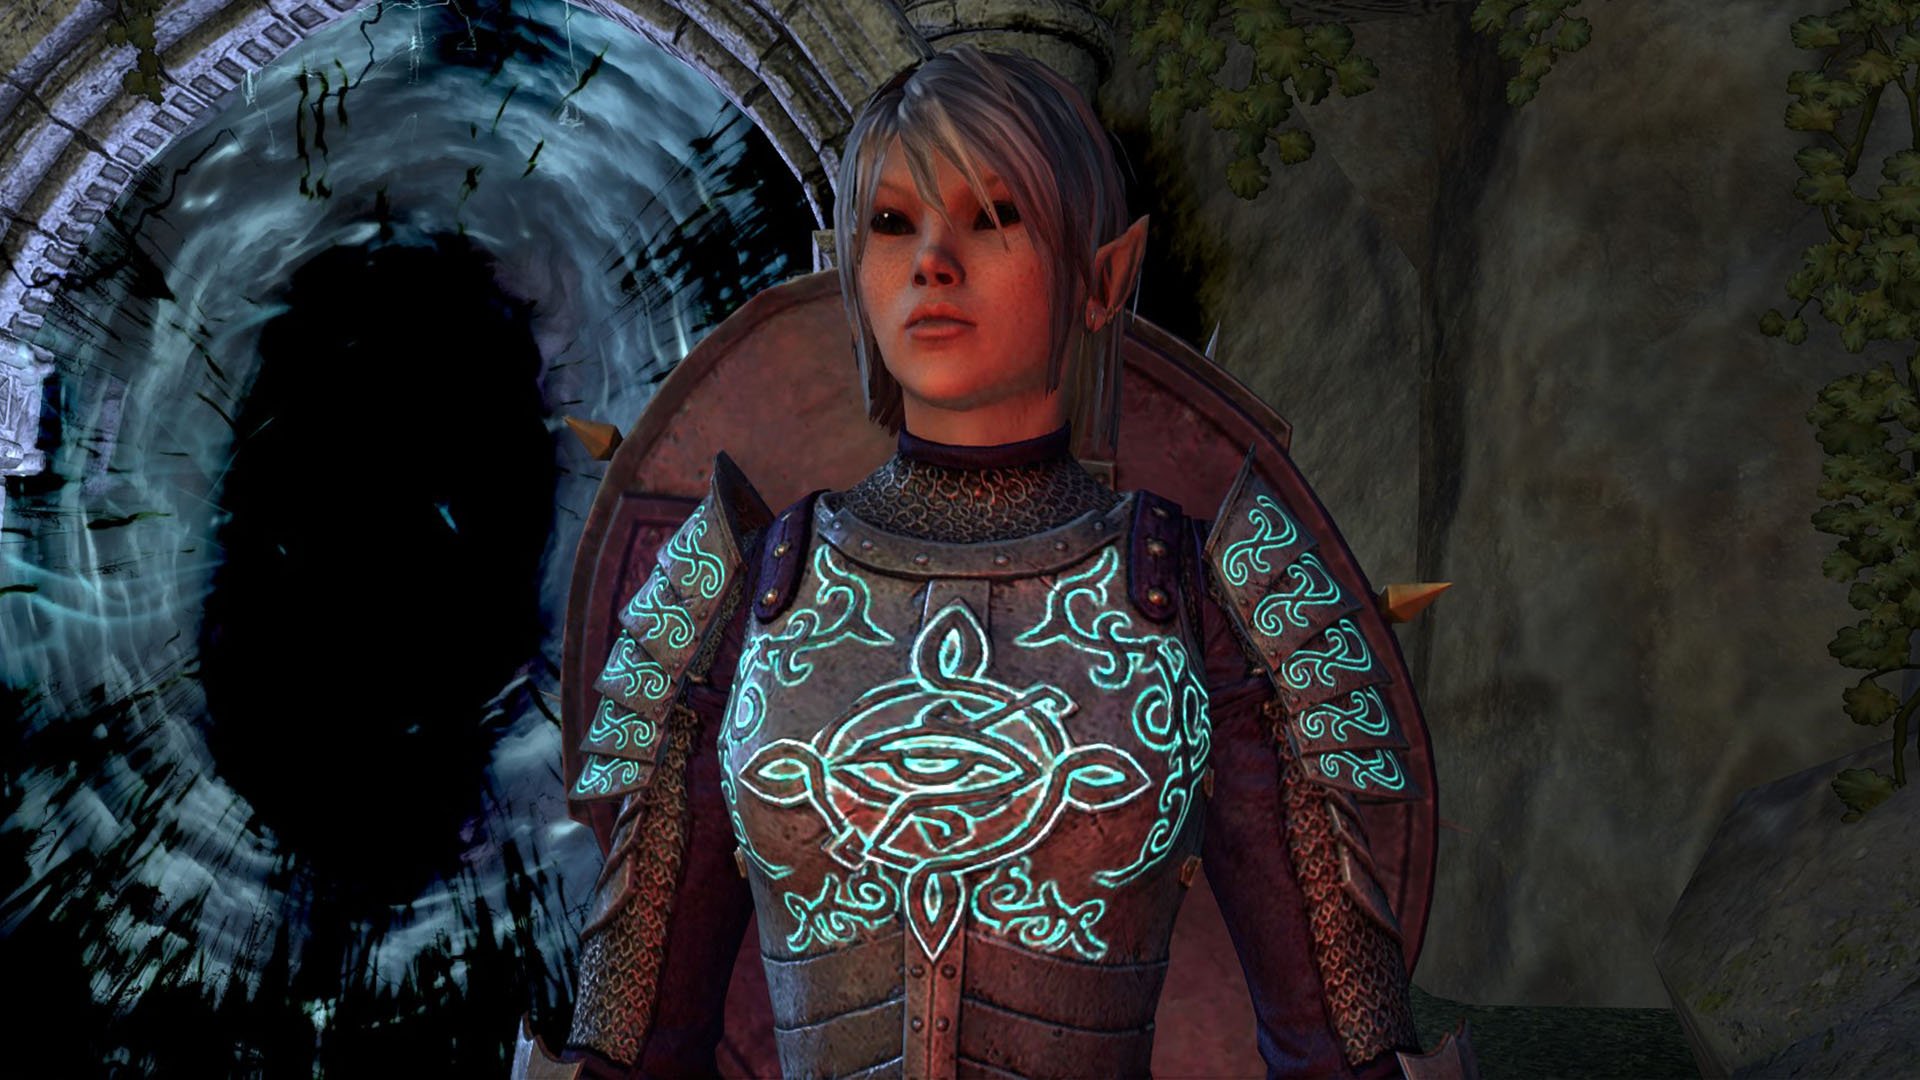 Votary Nahlia during the ESO Scribing Questline